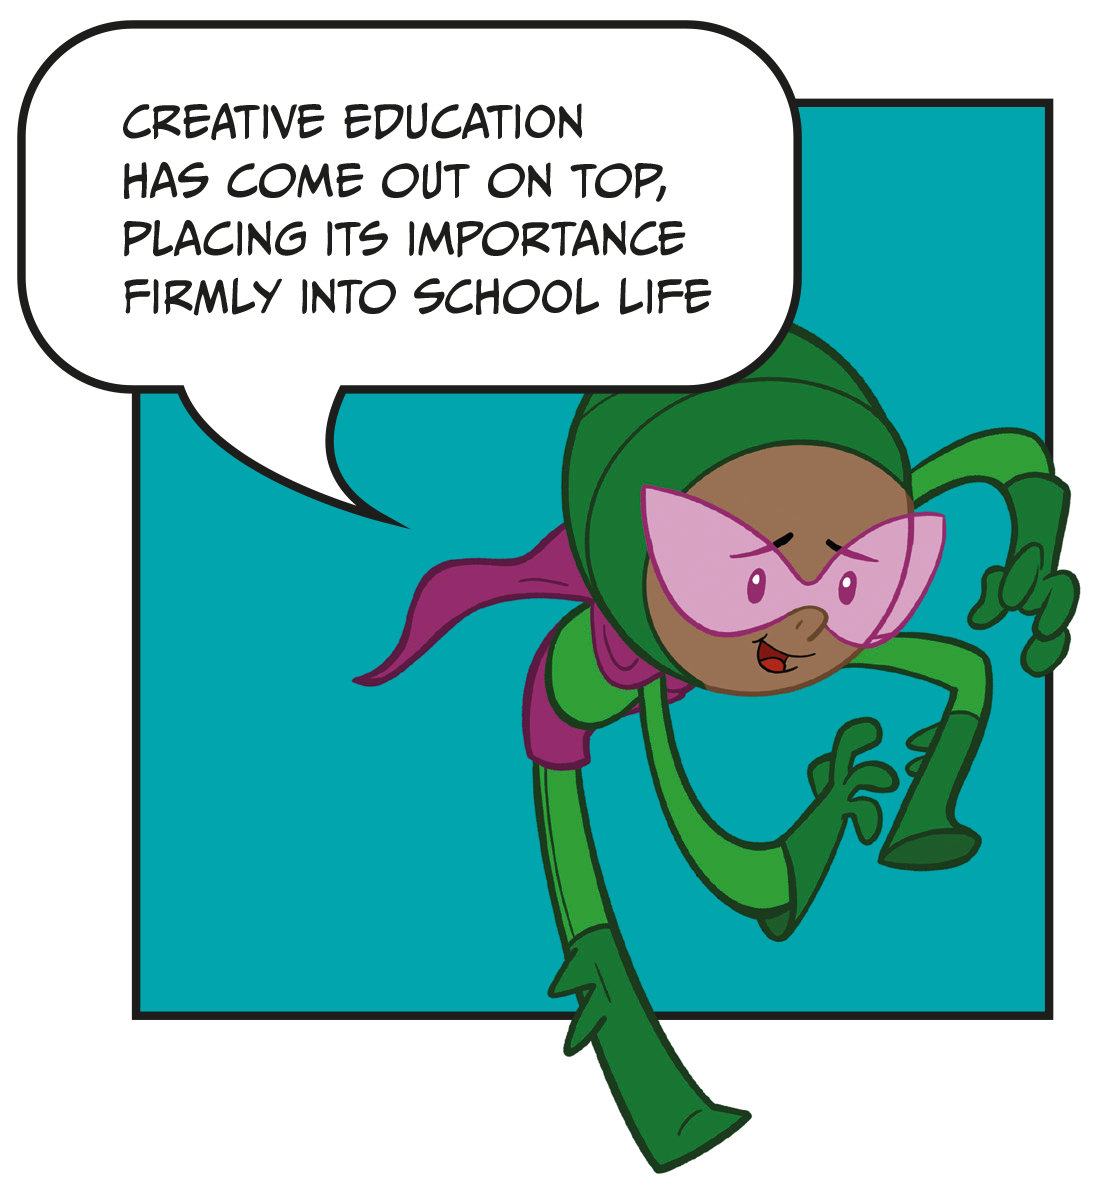 Image with text. Cartoon drawing of a superhero character saying "Creative education has come out on top, placing its importance firmly into school life".